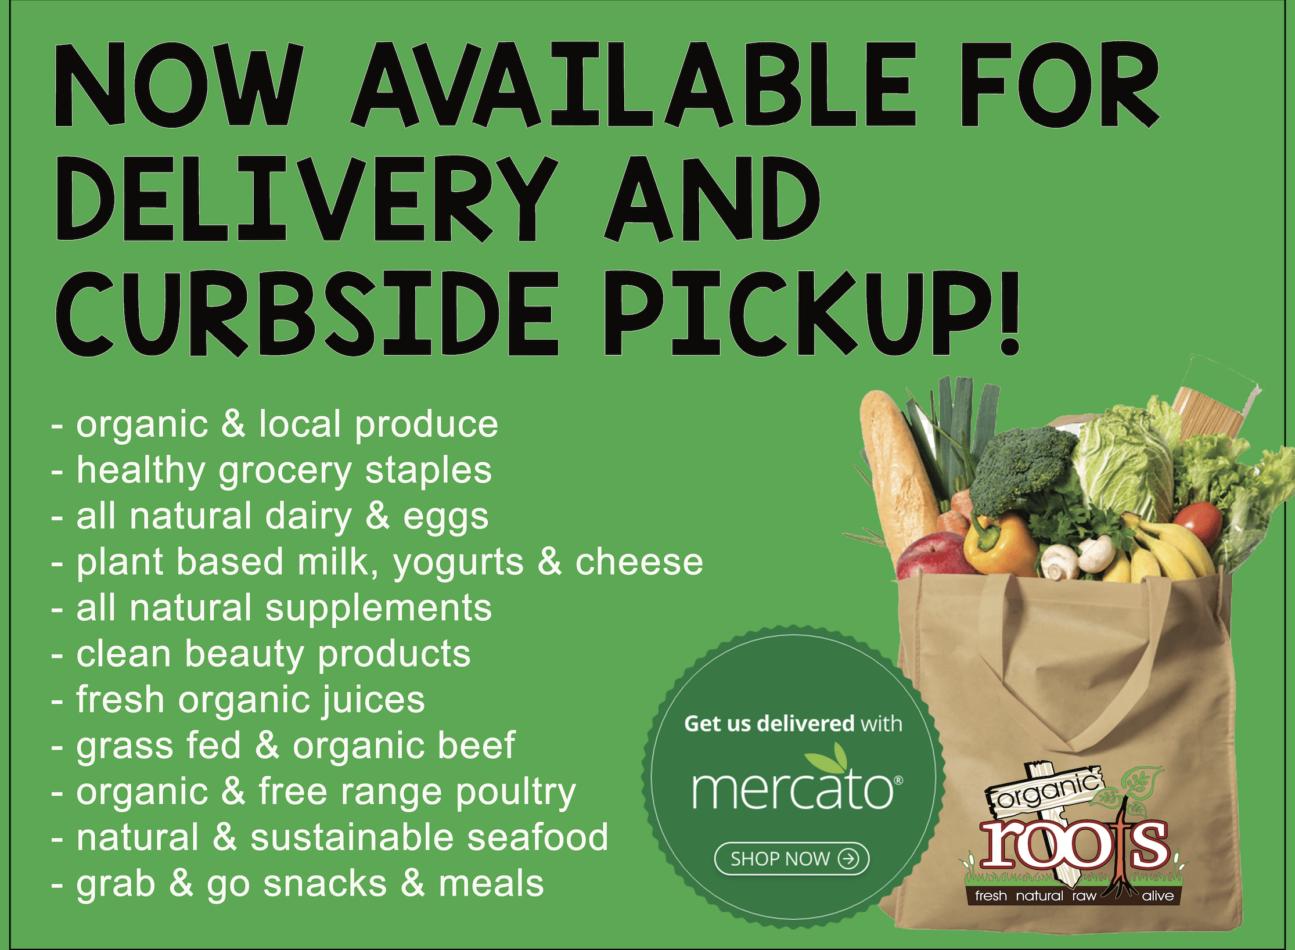 available for delivery and curbside pickup